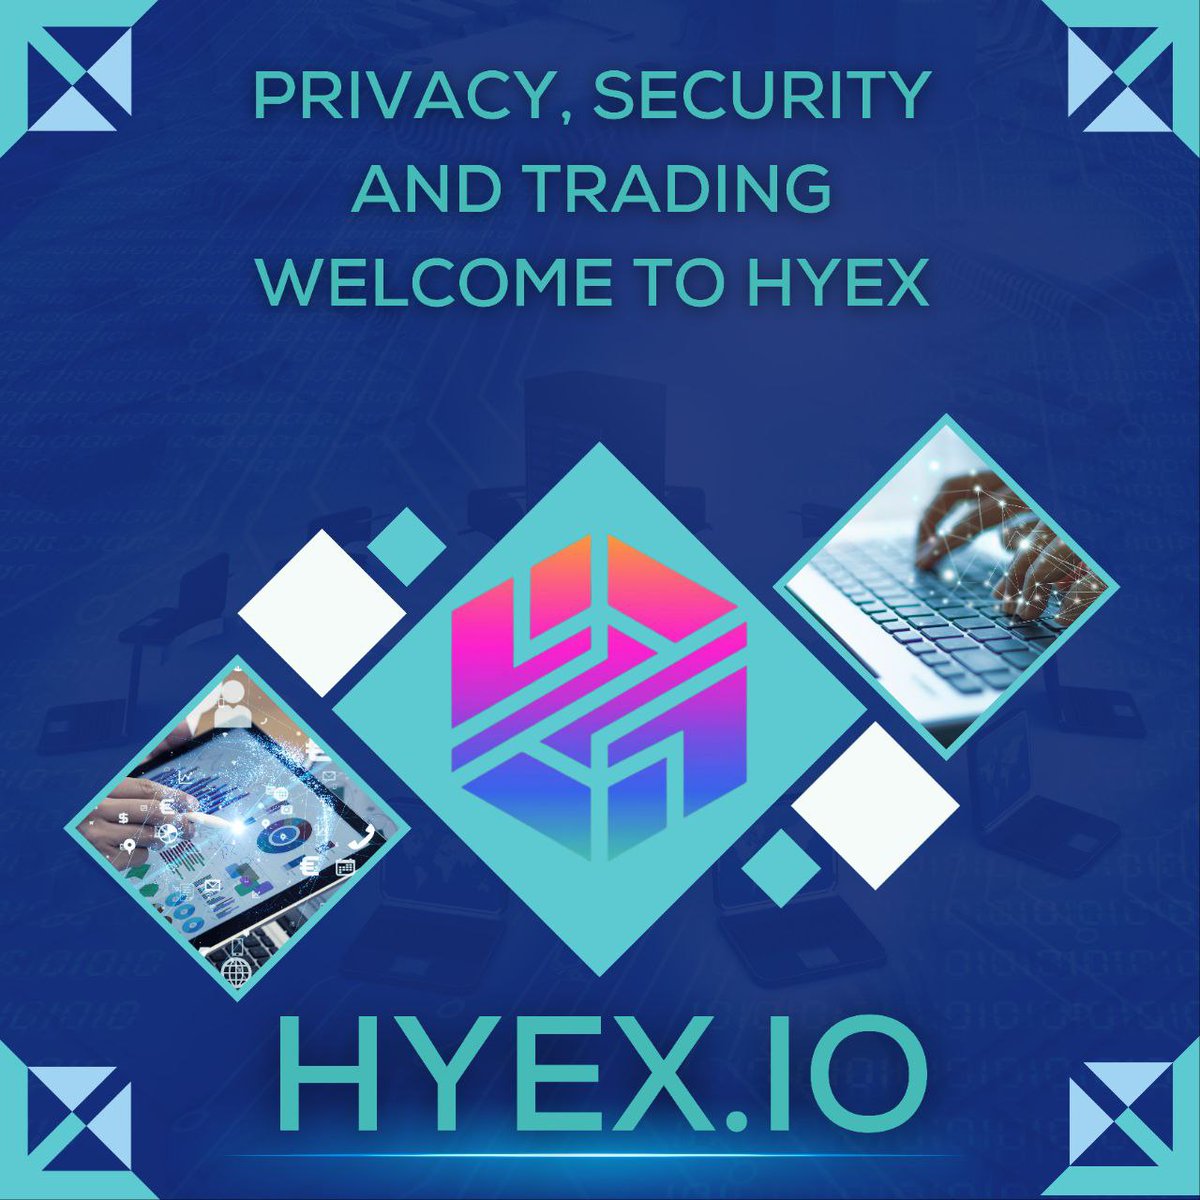 Benefit from the advanced features of $HYEX's S.T.A.C.I., offering insights and tailored trading strategies.

#HYEX
🎊
HYEX.io
@HYEX_io
t.me/HYEX_io
🎊
#Shibarium #Crypto #DAO
🎊
#Crypto_Marketing_Titans